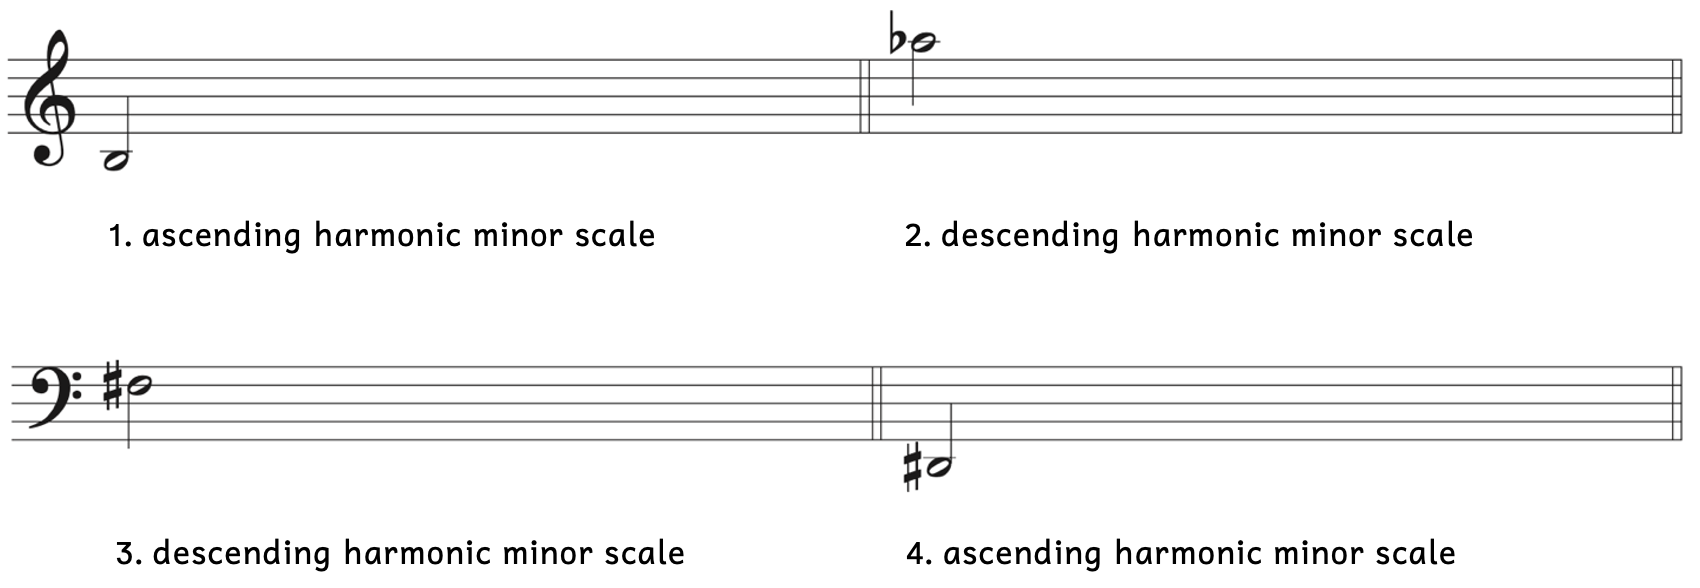 Number 1, an ascending harmonic minor scale beginning on B3. Number 2, a descending harmonic minor scale beginning on A-flat5. Number 3, a descending harmonic minor scale beginning on F-sharp3. Number 4, an ascending harmonic minor scale beginning on D-sharp 2.